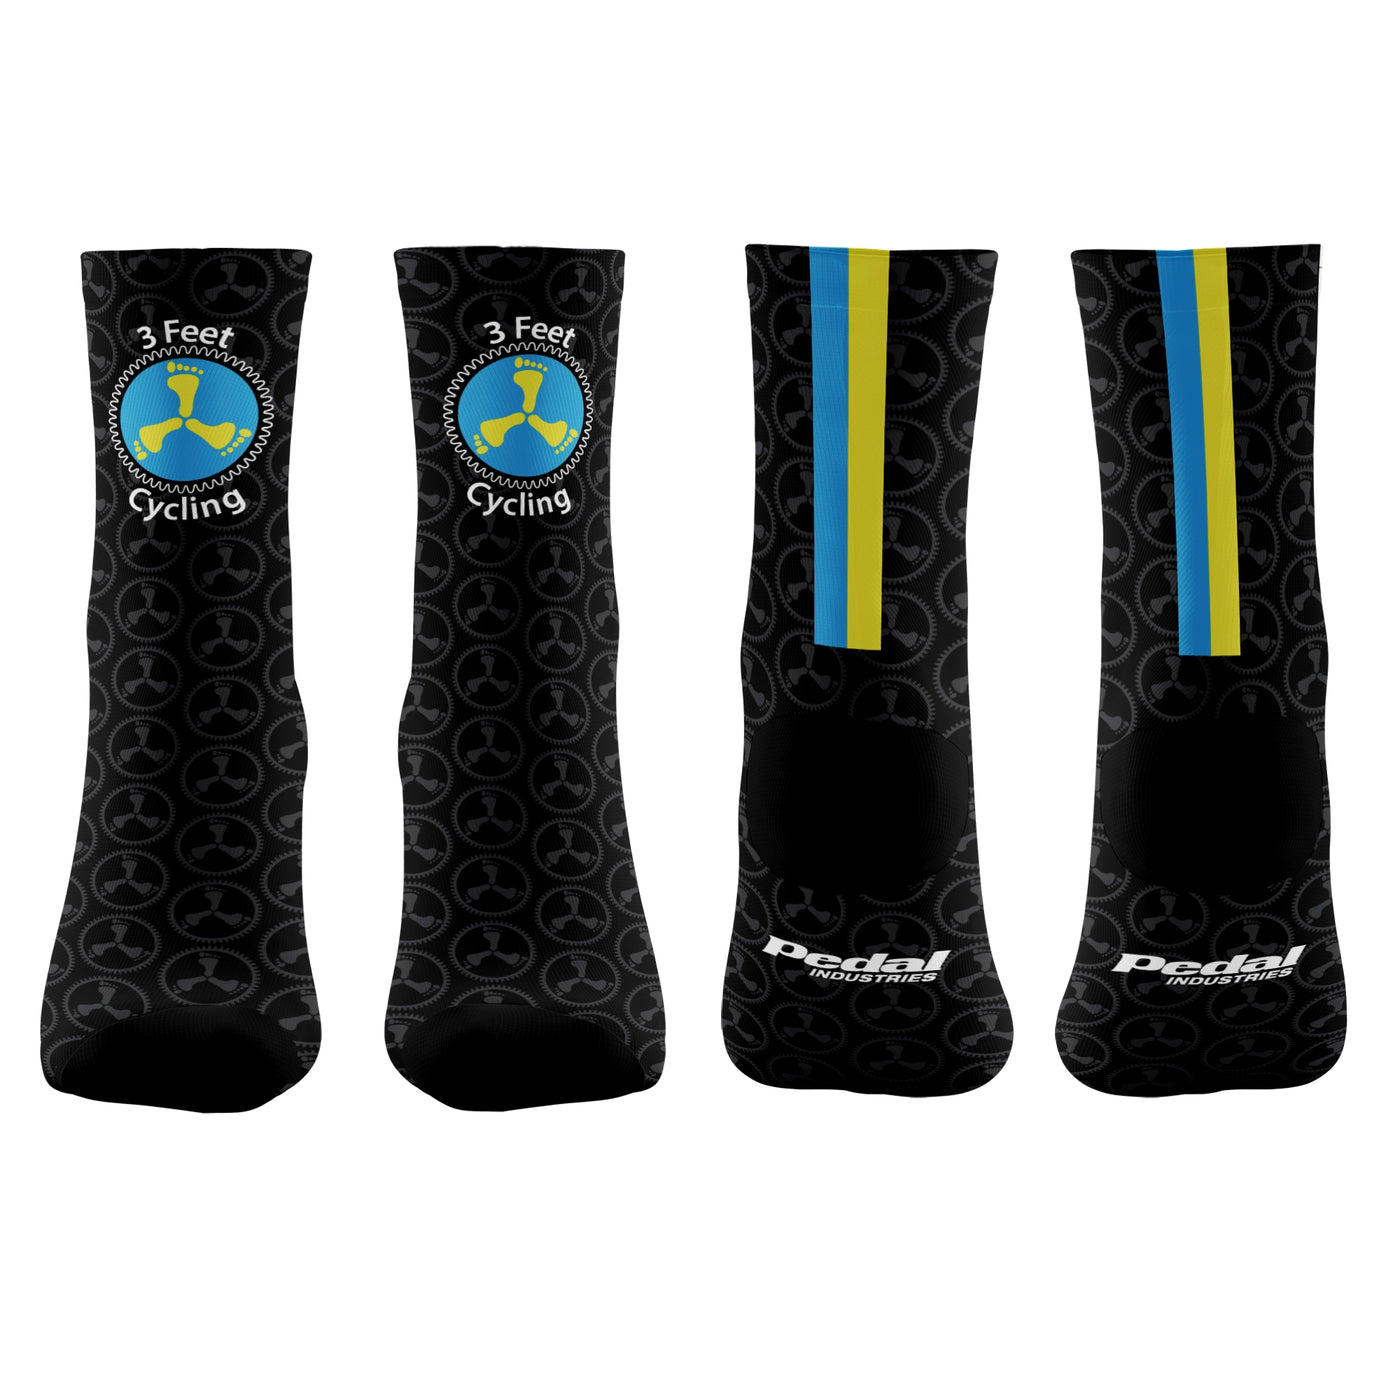 3 Feet Cycling 2024 SUBLIMATED SOCK